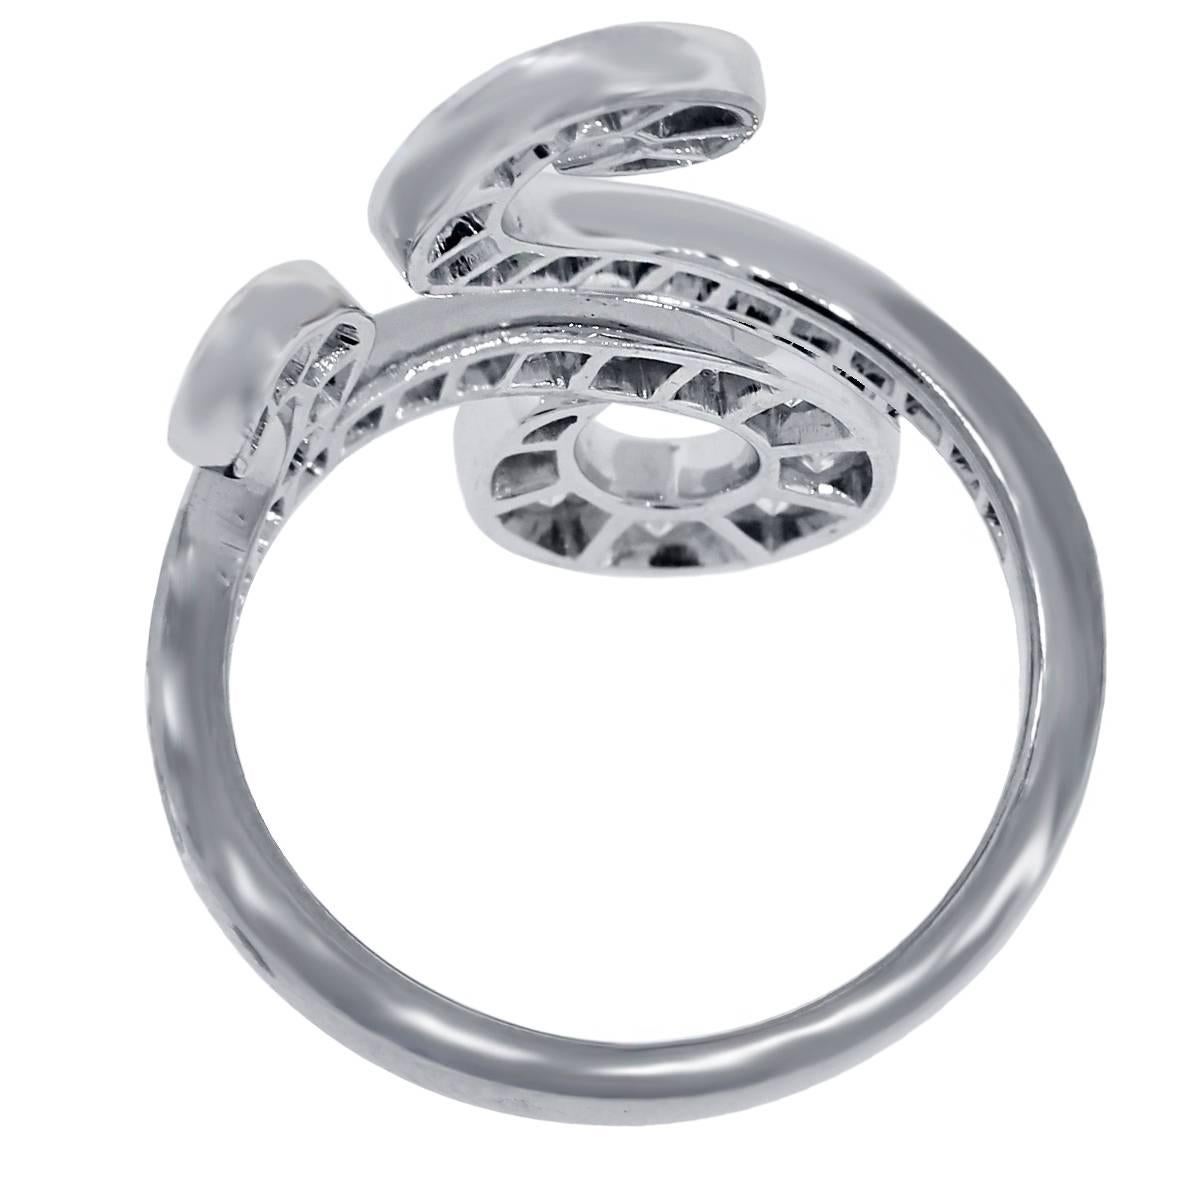 Style 	Van Cleef & Arpels Oiseaux de Paradis 18k White Gold 1.1ctw Diamond Ring
Material
	18k White Gold
Diamond Details
	Approximately 1.1ctw of 41 Round Brilliant diamonds. Diamonds are D,E,F in color and IF to VVS in clarity.
Ring Size
	5 (can be